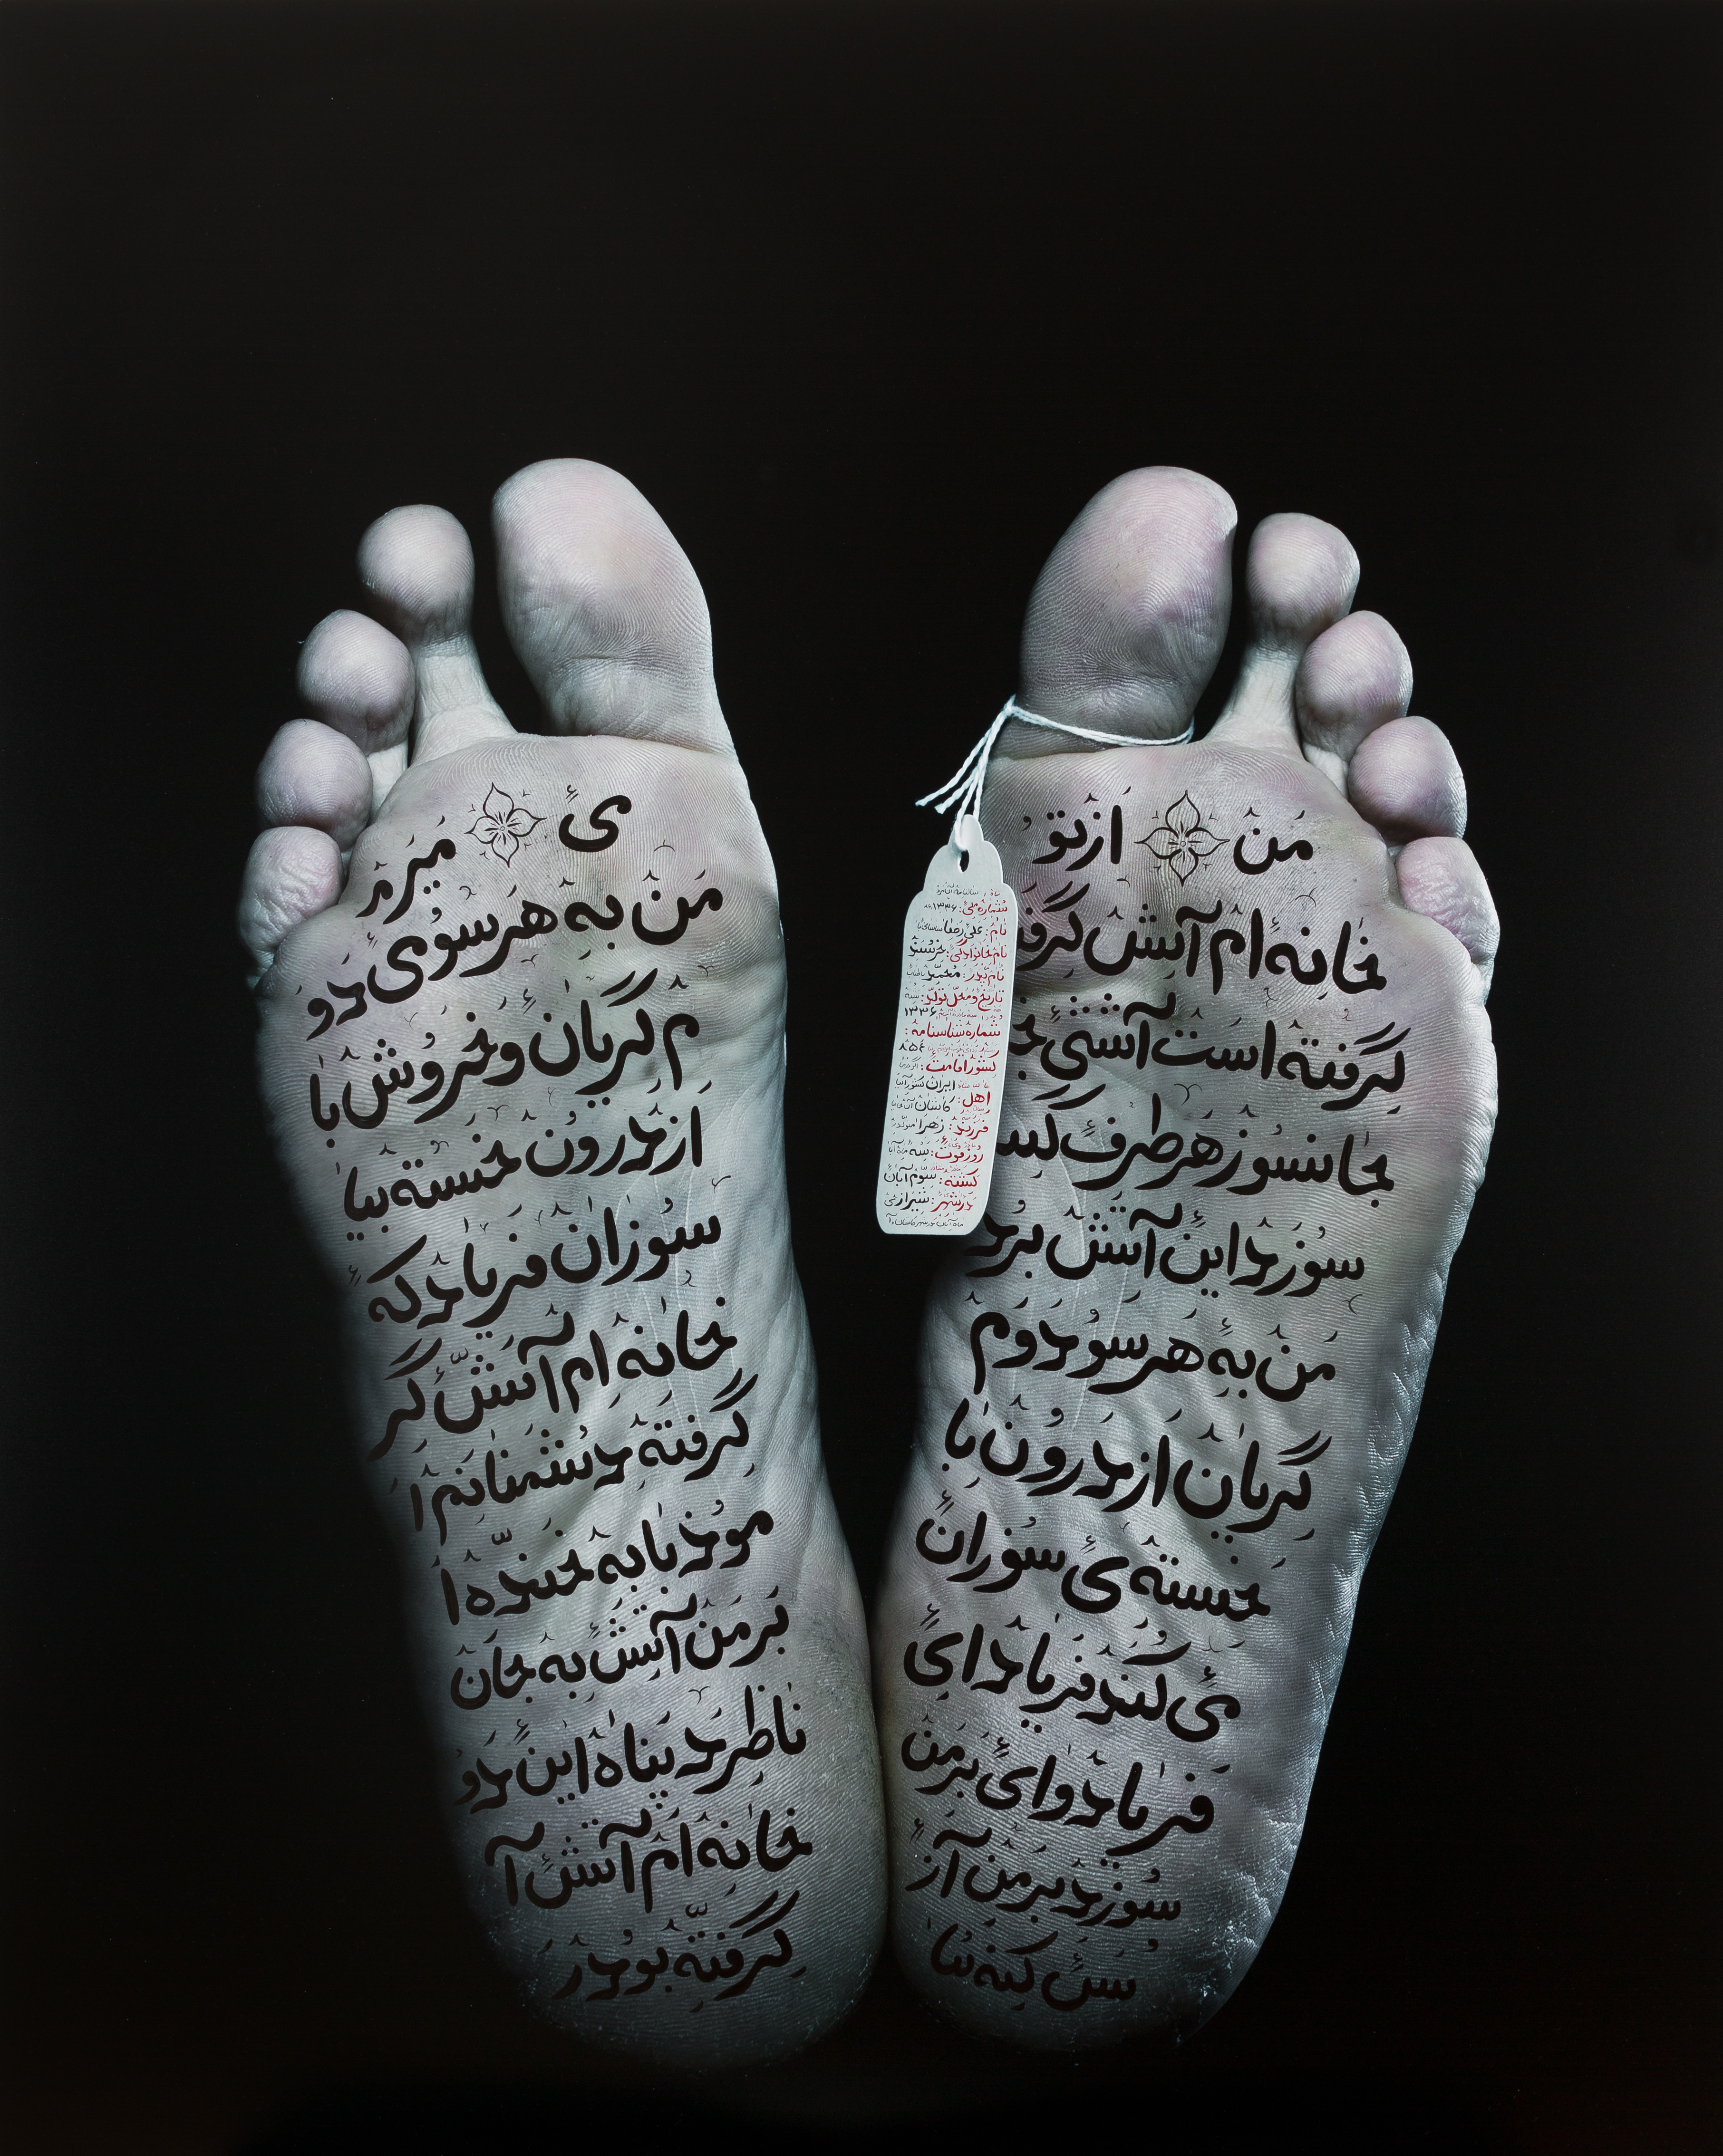 Shirin Neshat - Hassan, from Our House Is on Fire series, 2013, Digital C-print and ink